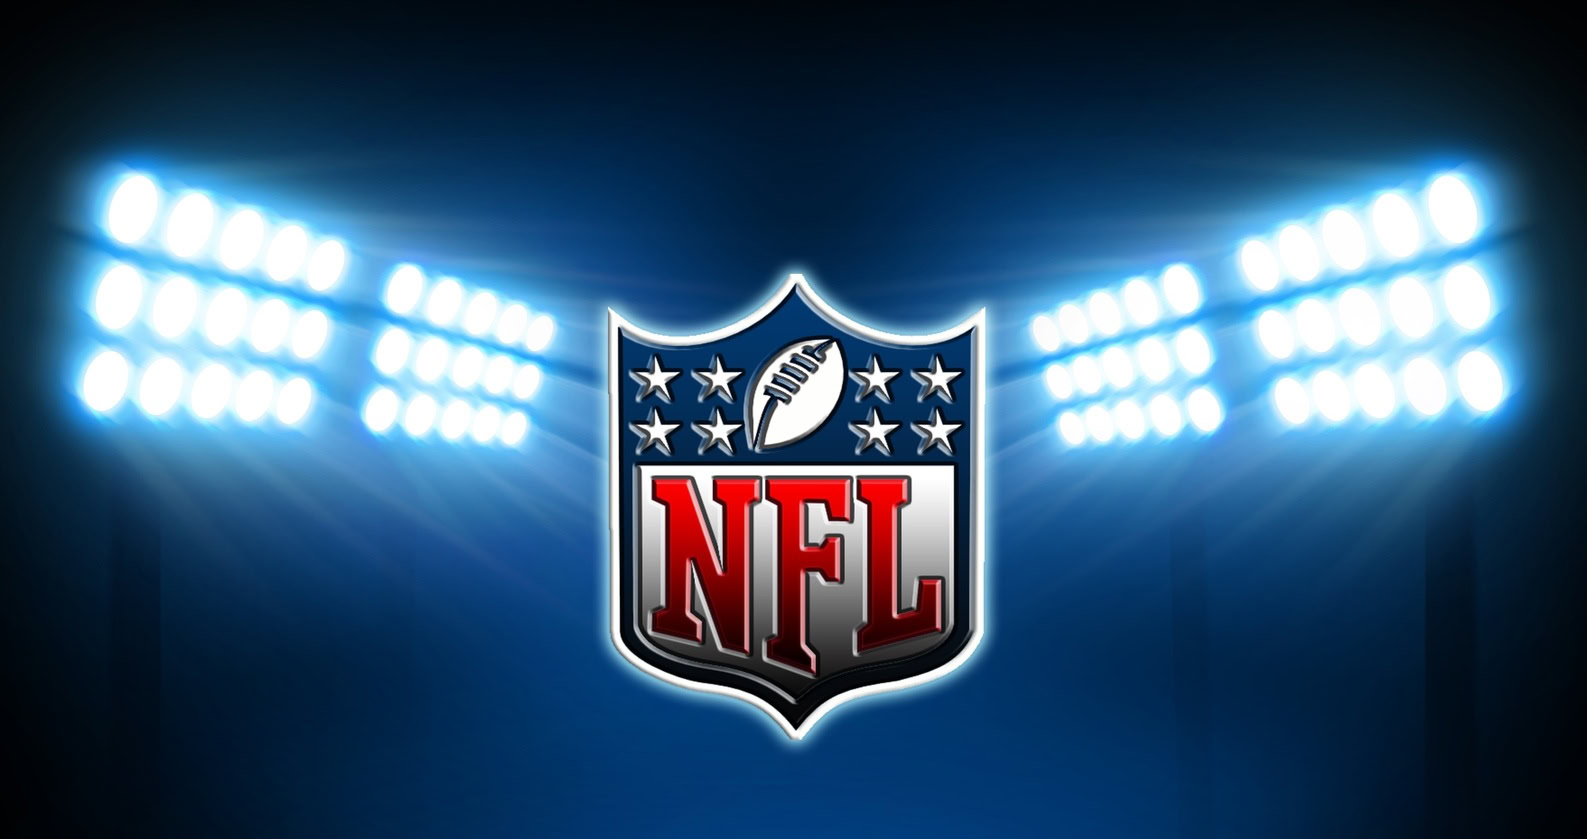 NFL highlights are coming to YouTube 